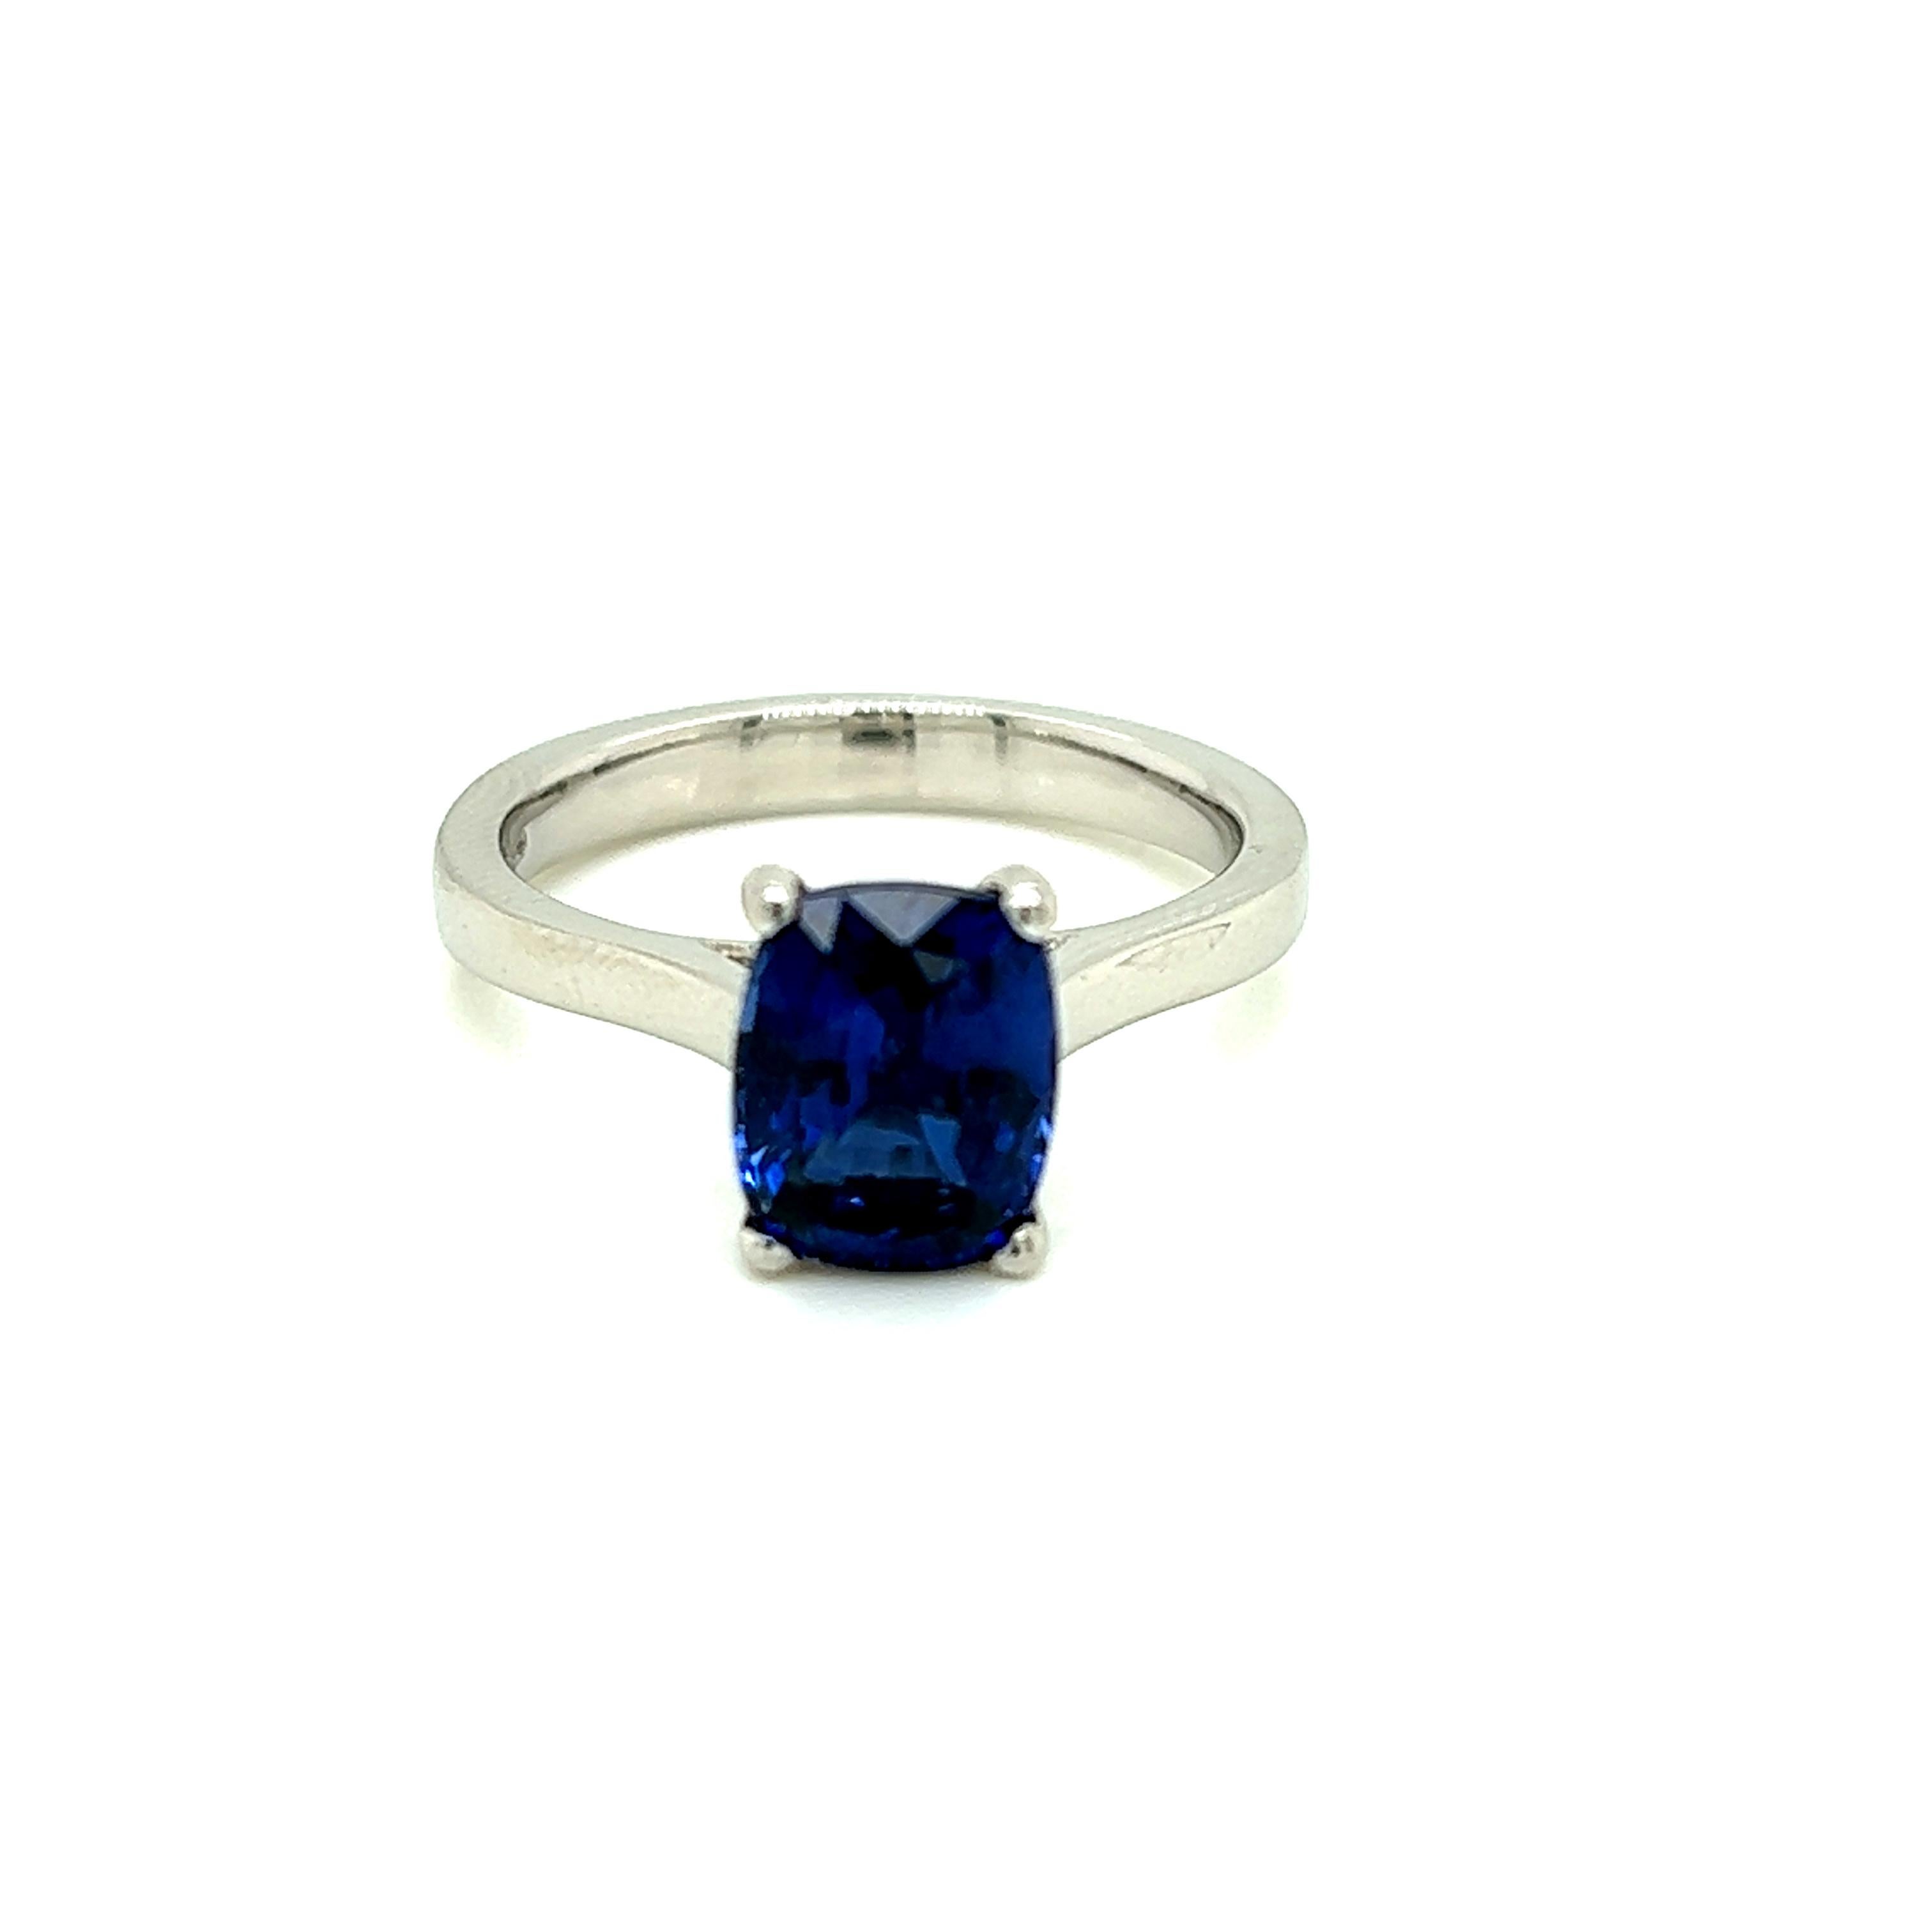 2.42 Carat Cushion cut Blue Sapphire Solitaire Platinum Ring

This classic solitaire ring features a 2.42 carat cushion cut Blue Sapphire at its centre. Words cannot do justice to describe the resplendent jewel held in a claw setting on this